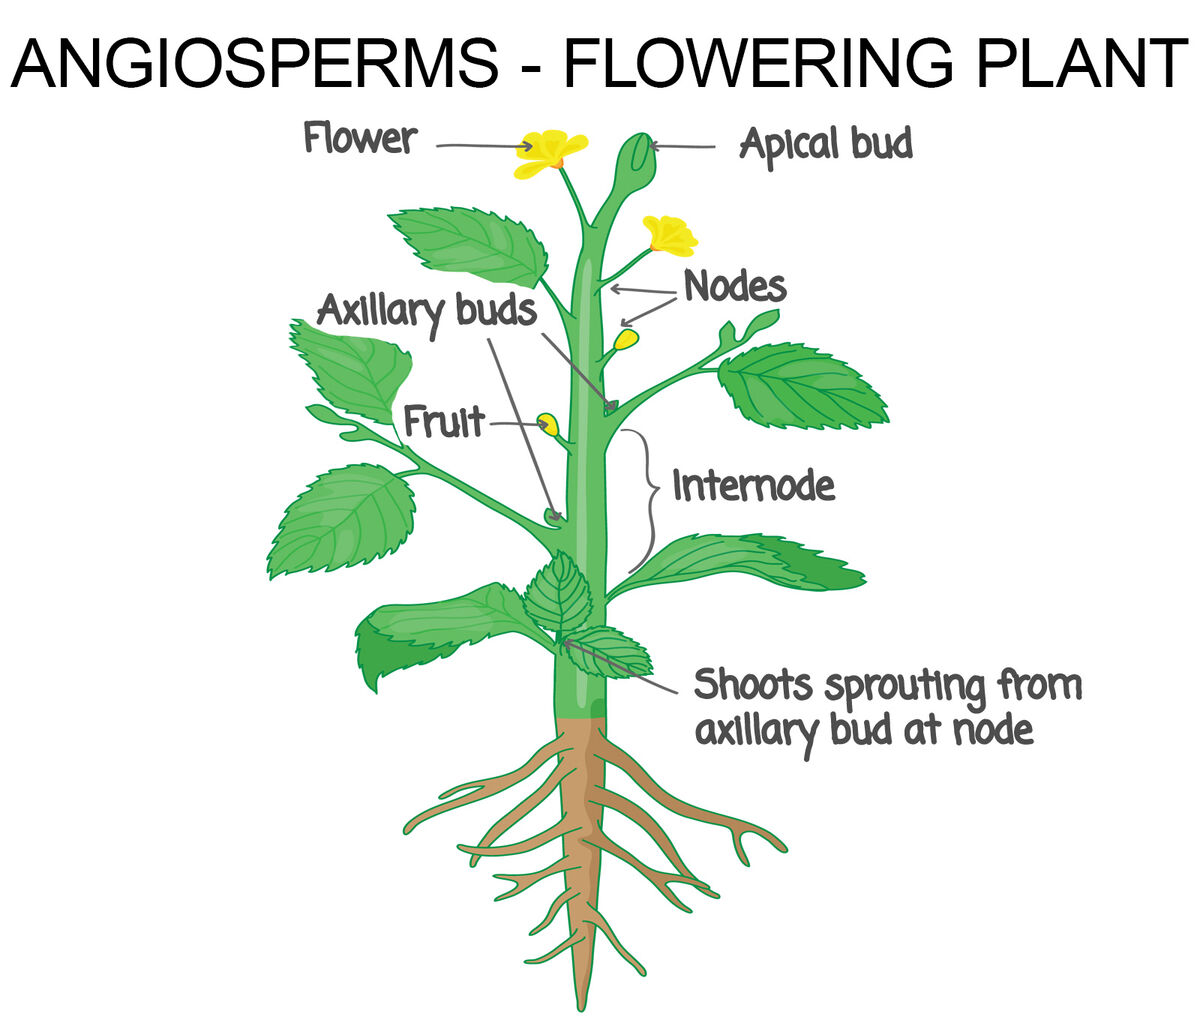 angiosperms are flowering plants